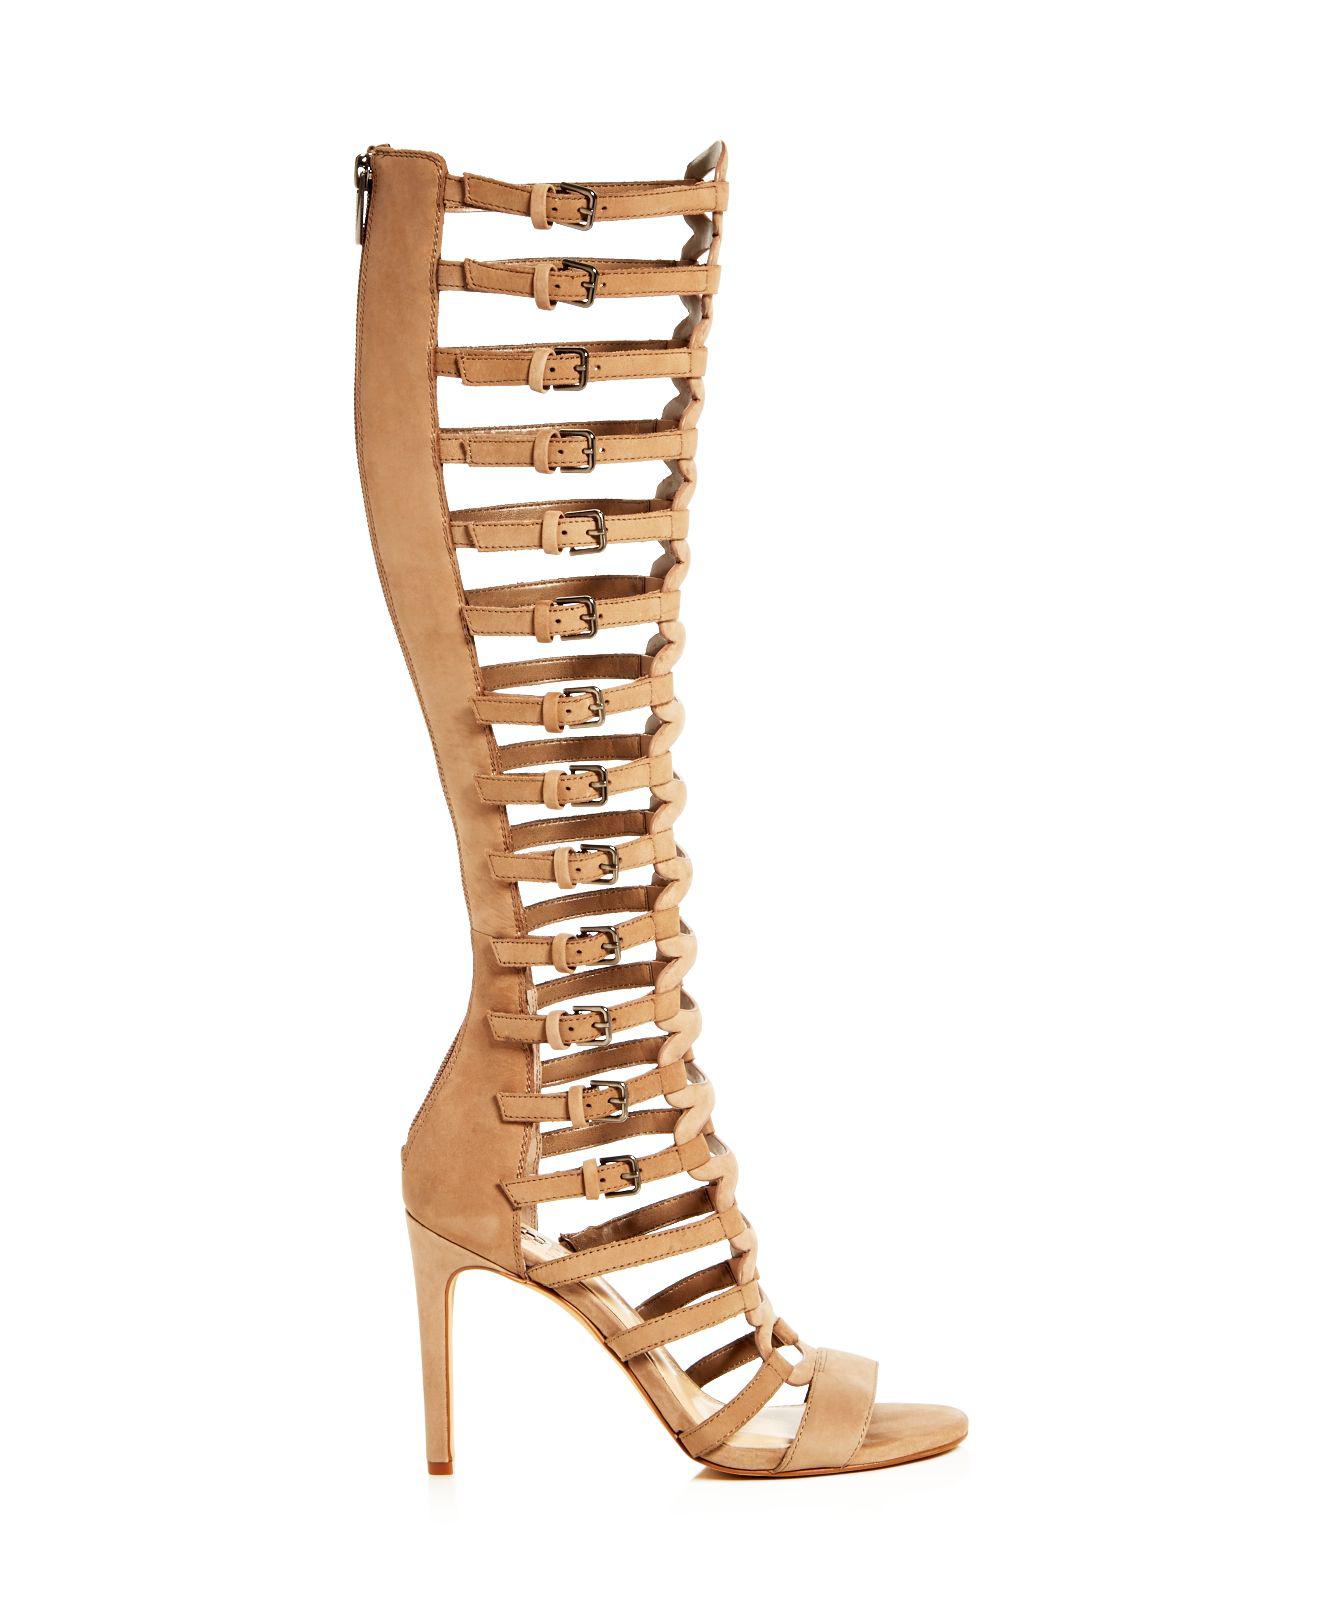 Lyst - Vince Camuto Chesta Caged Gladiator Sandals in Natural